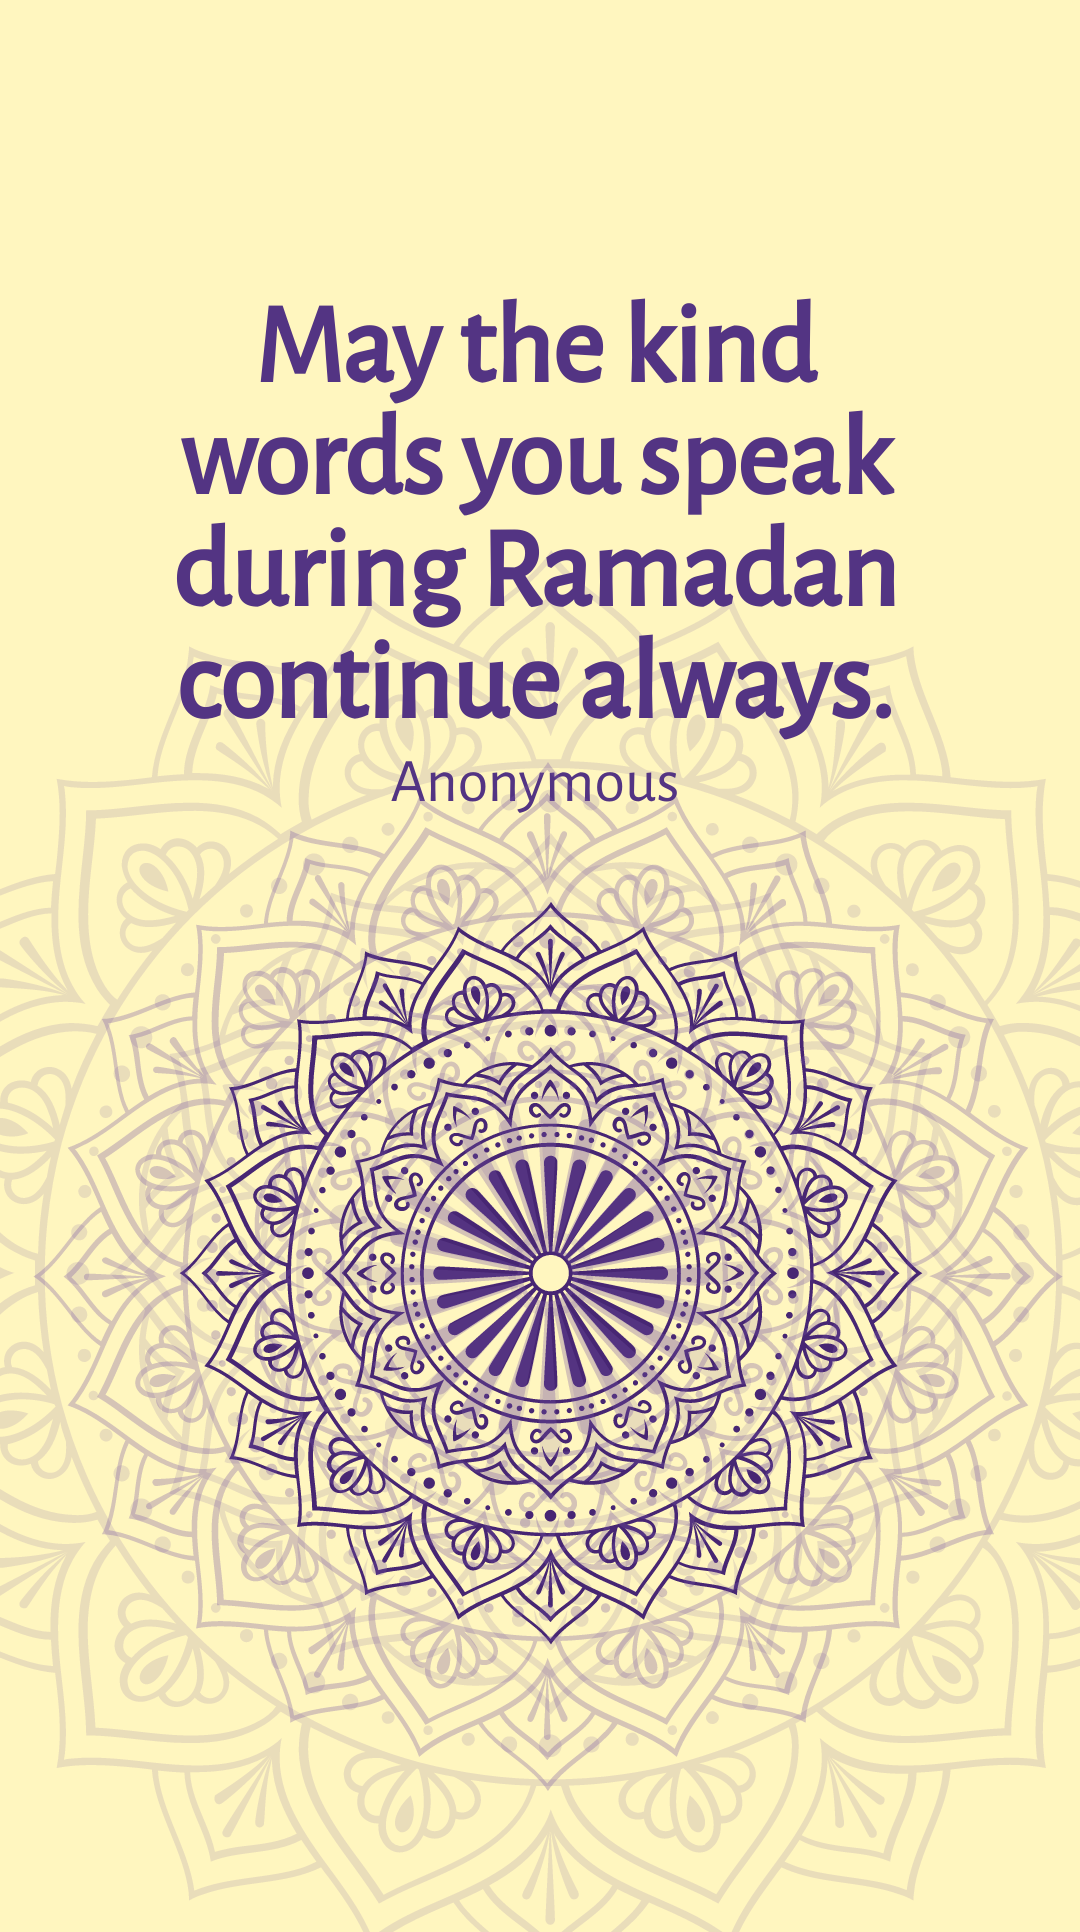 Free Anonymous - May the kind words you speak during Ramadan continue always.